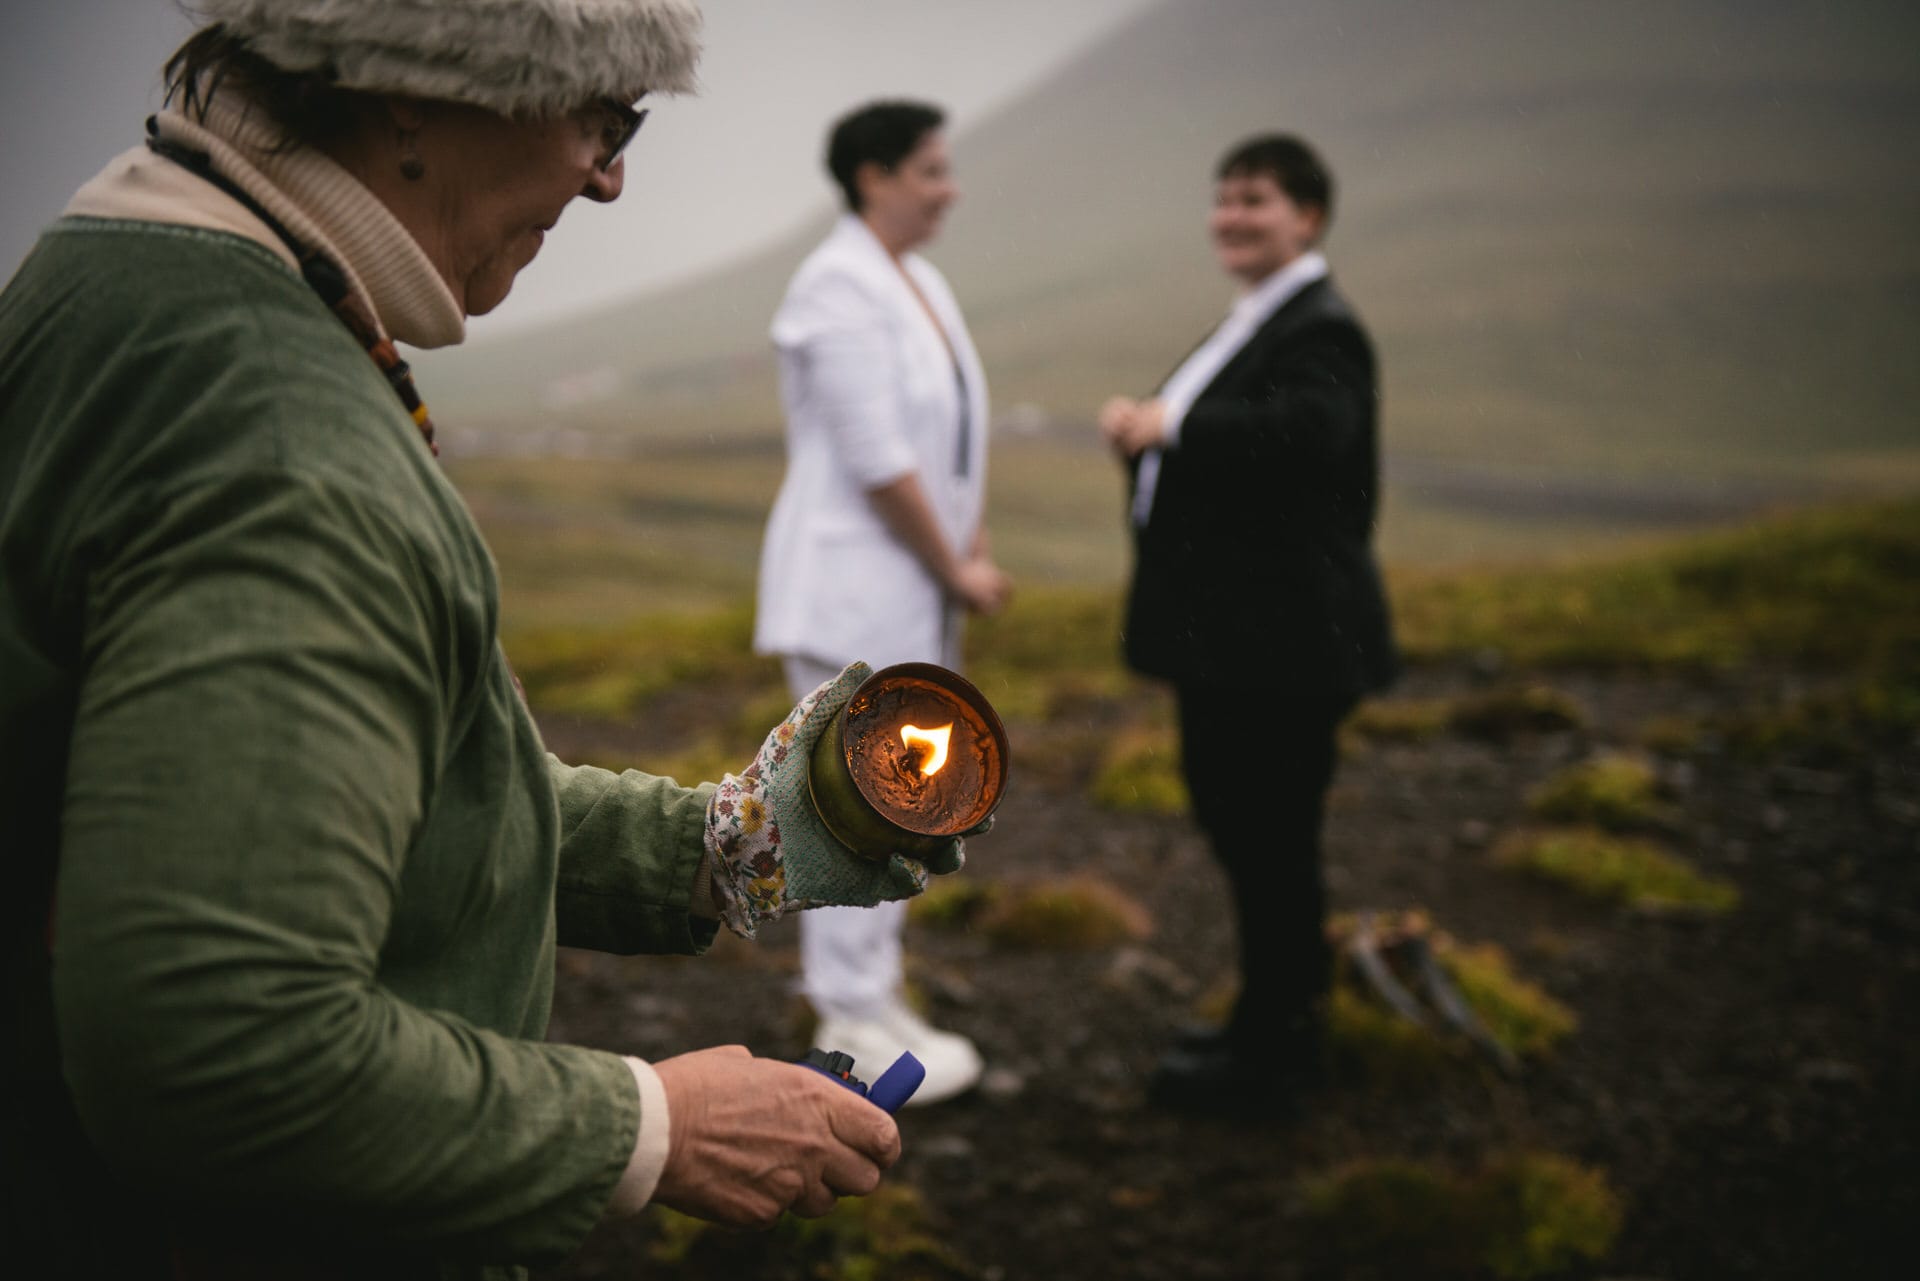 Lighting up candles to symbolize fire before a Pagan wedding ceremony in Iceland